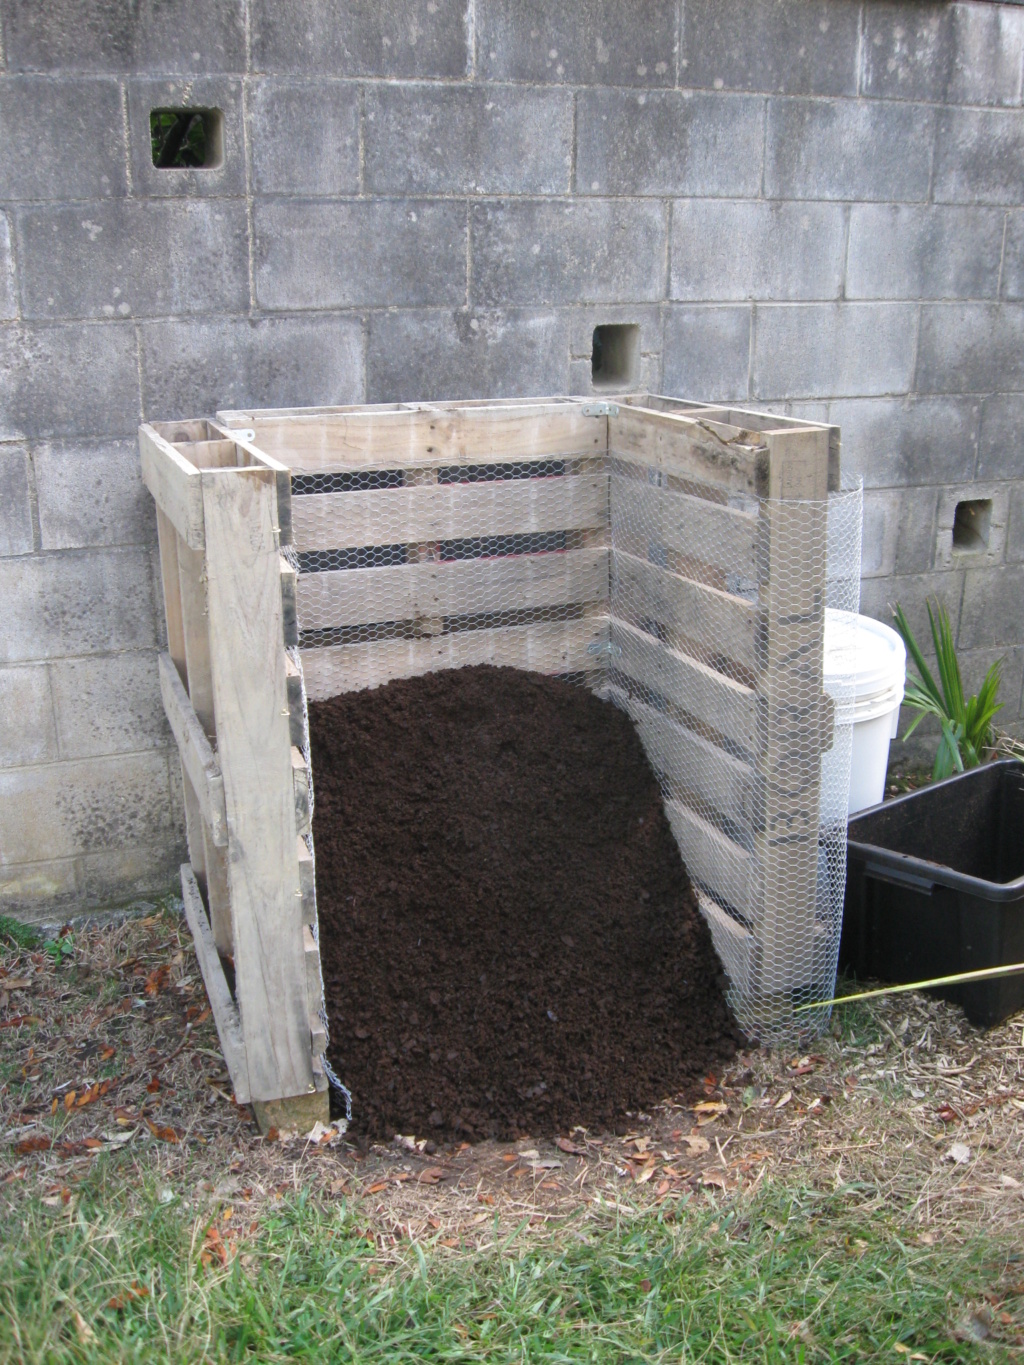 Advice needed for winter compost storage area Img_2832